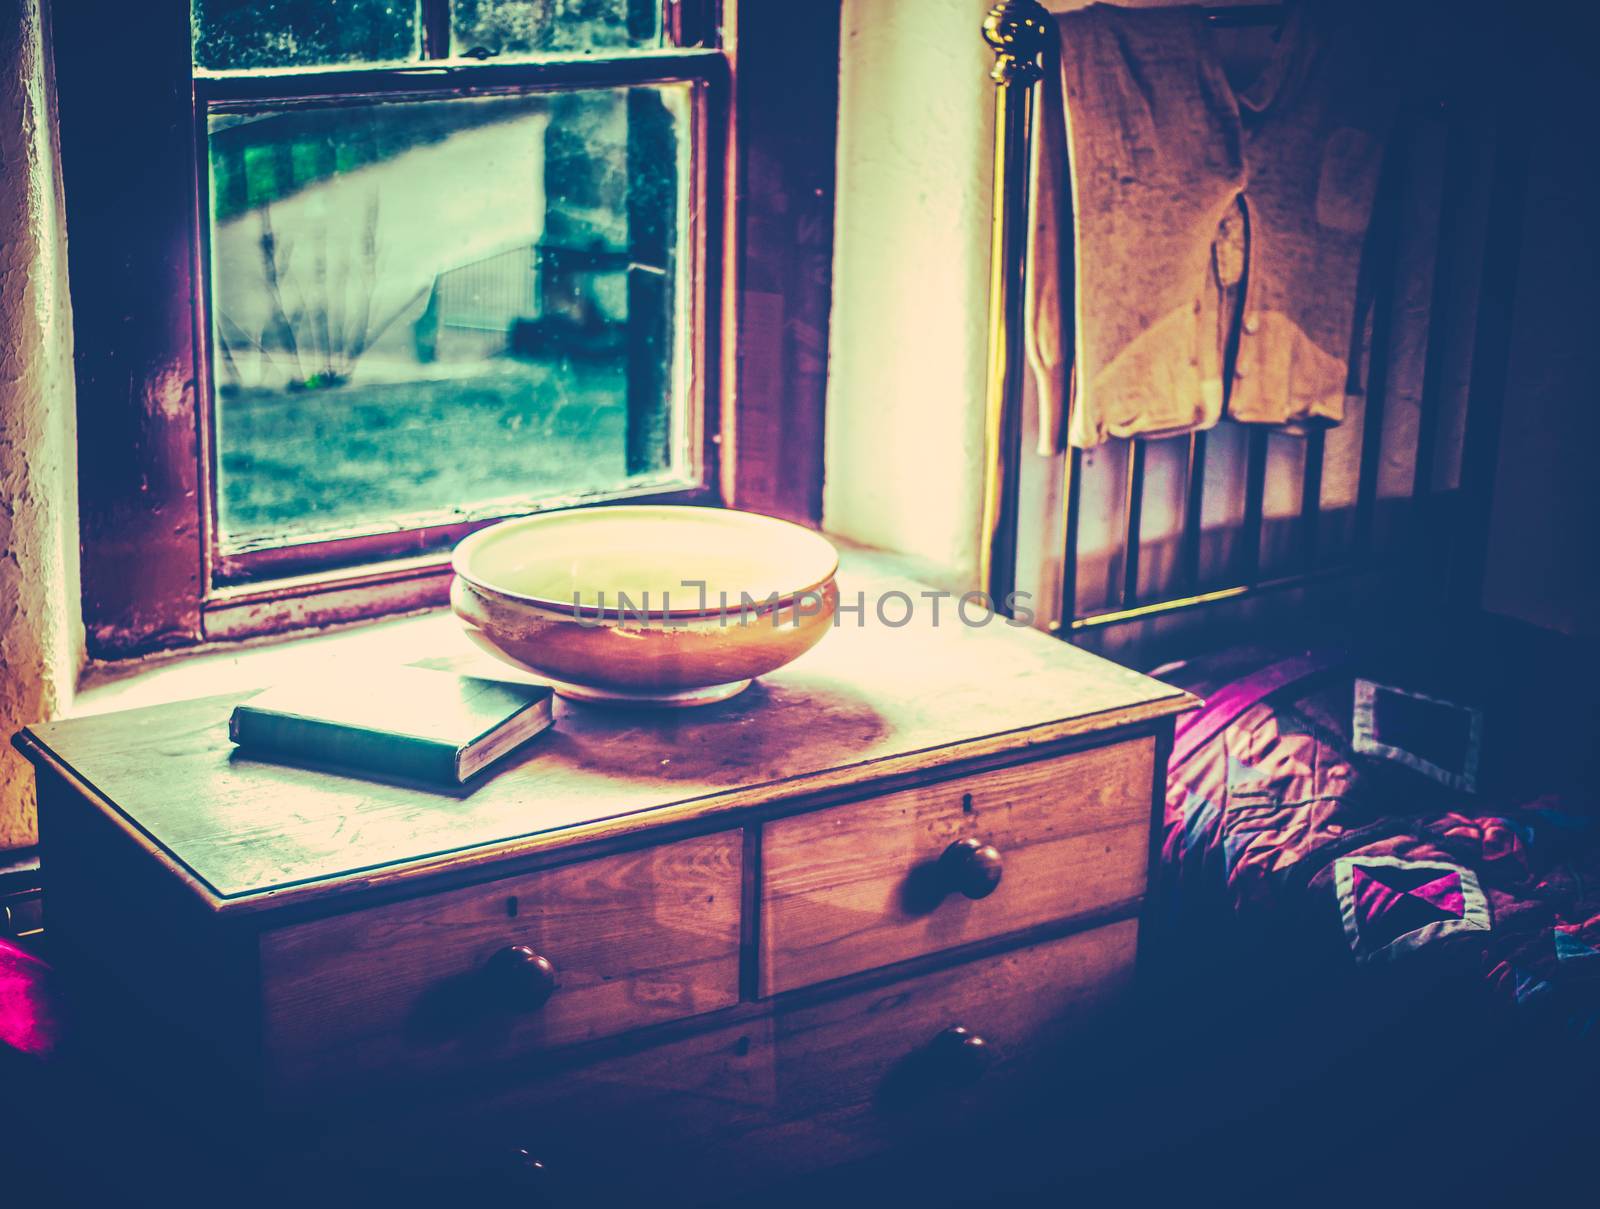 Old Fashioned 19th Century Bedroom Scene With Long Johns, Wash Basin And Bible